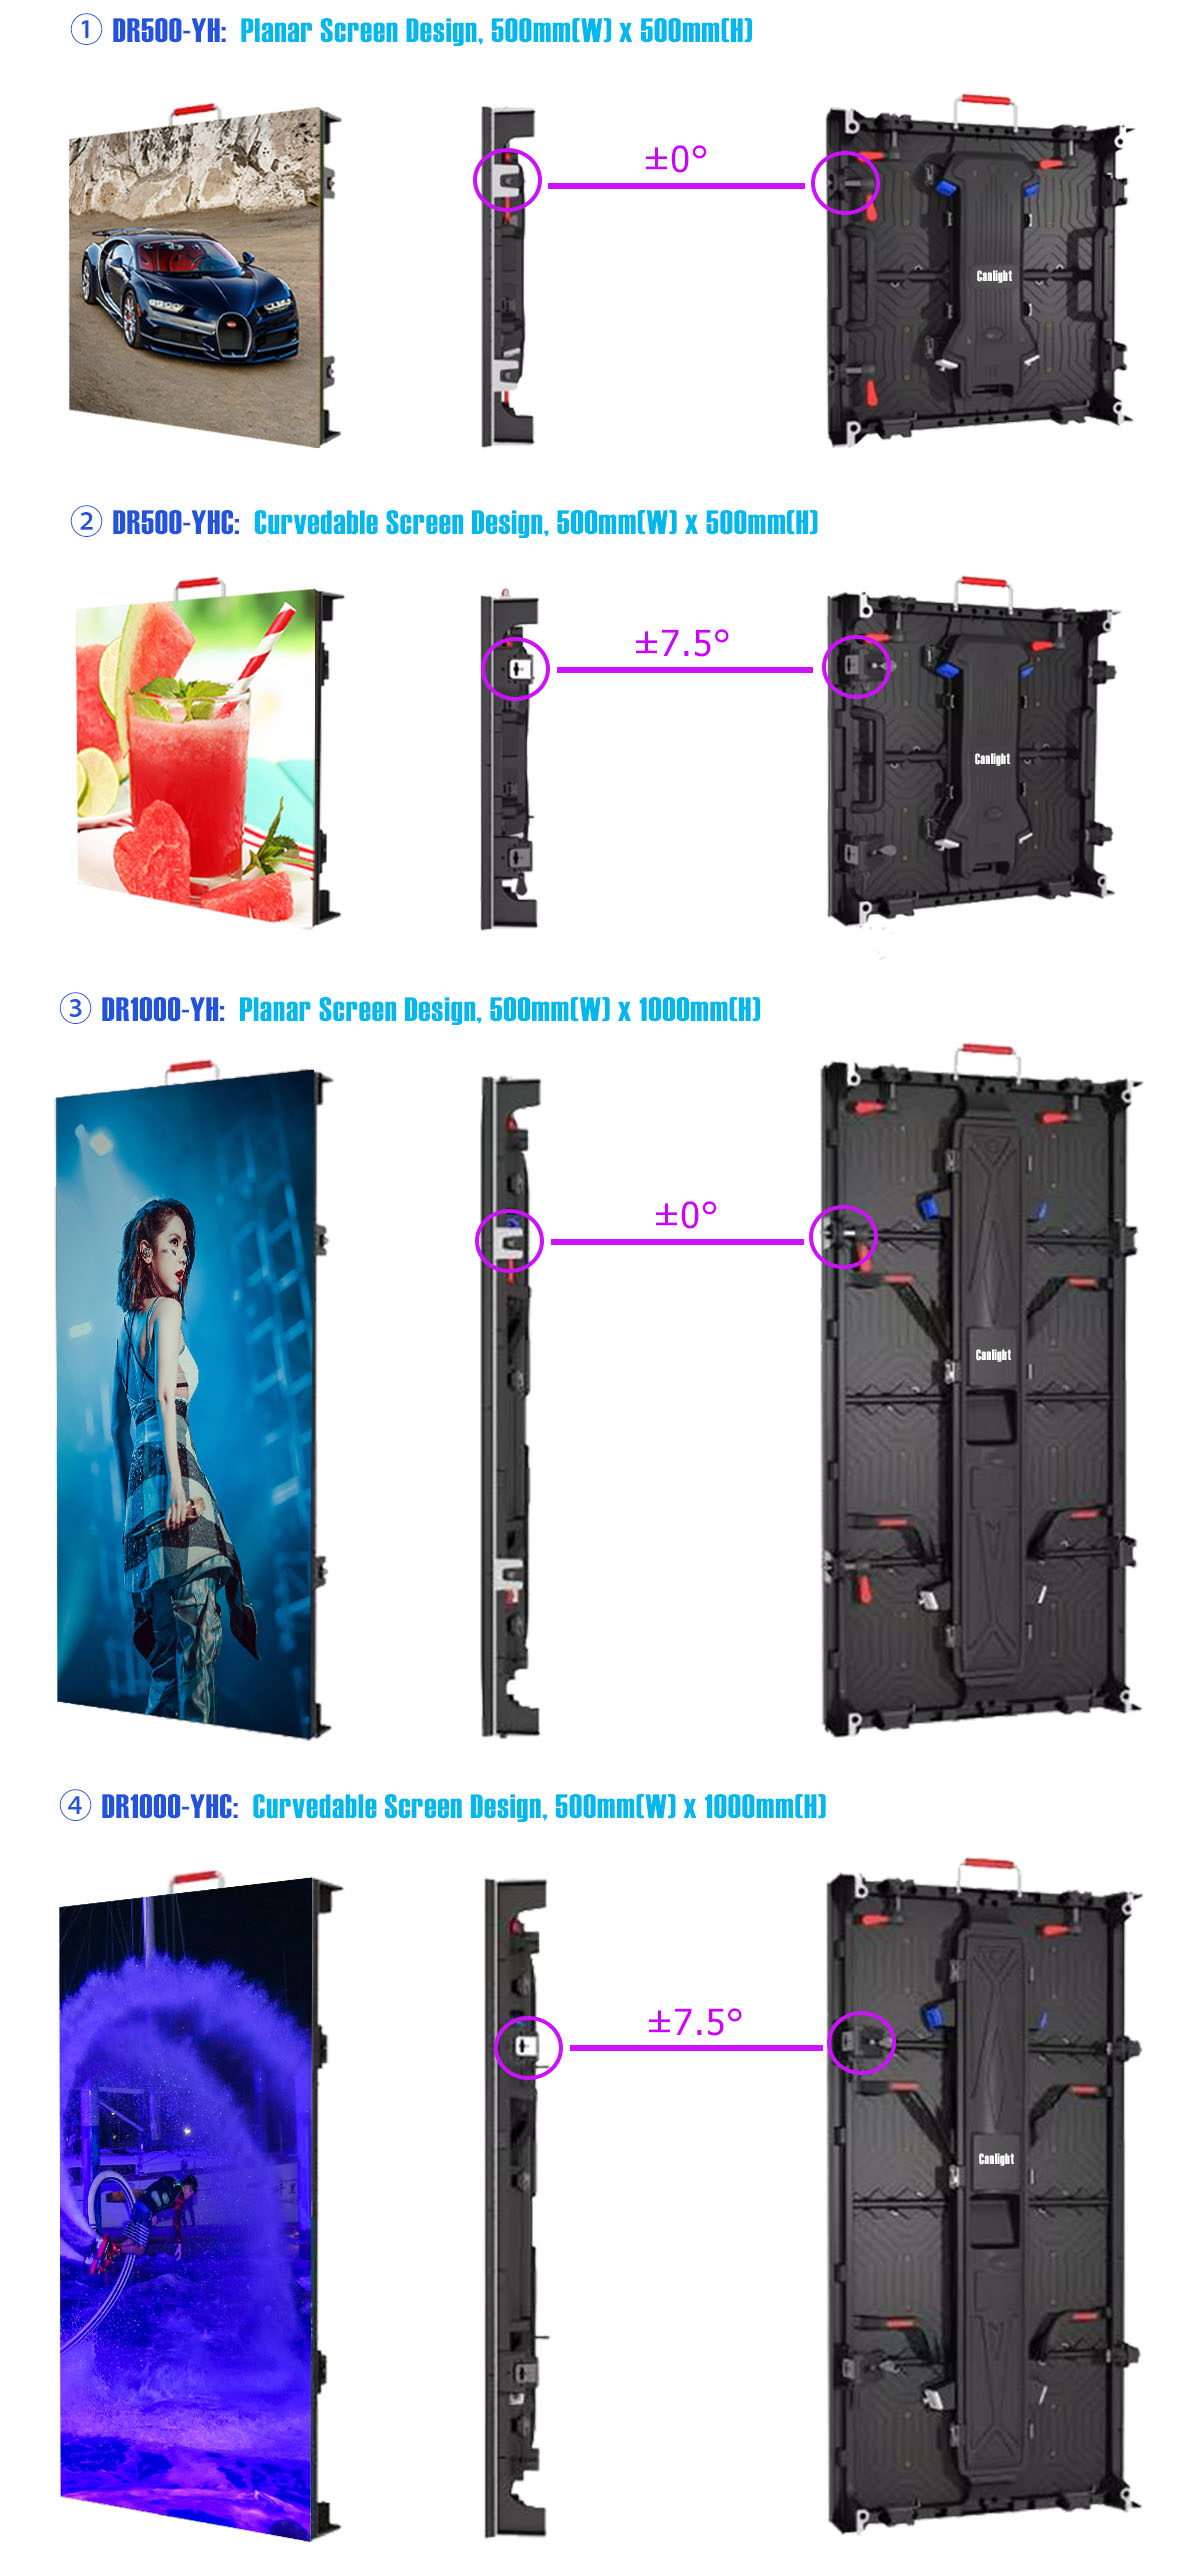 The 8th Features of DR500-YH 500x500mm and DR1000-YH 500x1000mm Curvedable Die-cast LED Cabinet Panel of Professional Rental LED Display Screen Application